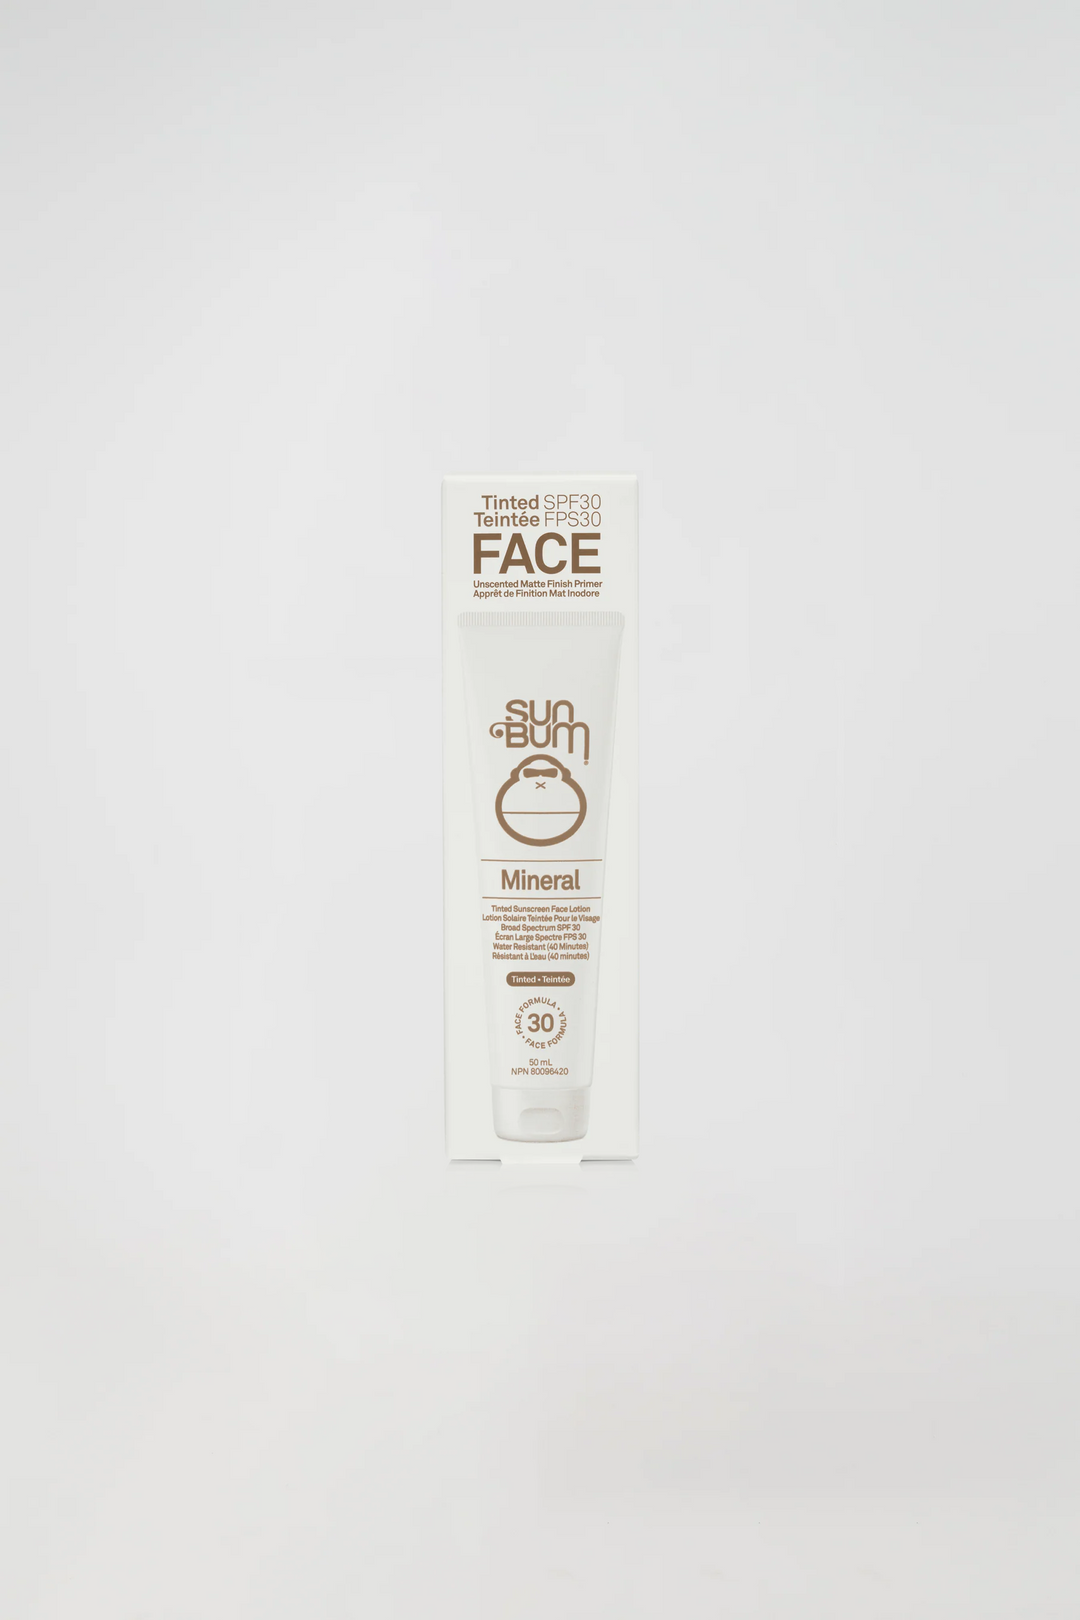 Sunbum SPF 30 Mineral Tinted Face Lotion